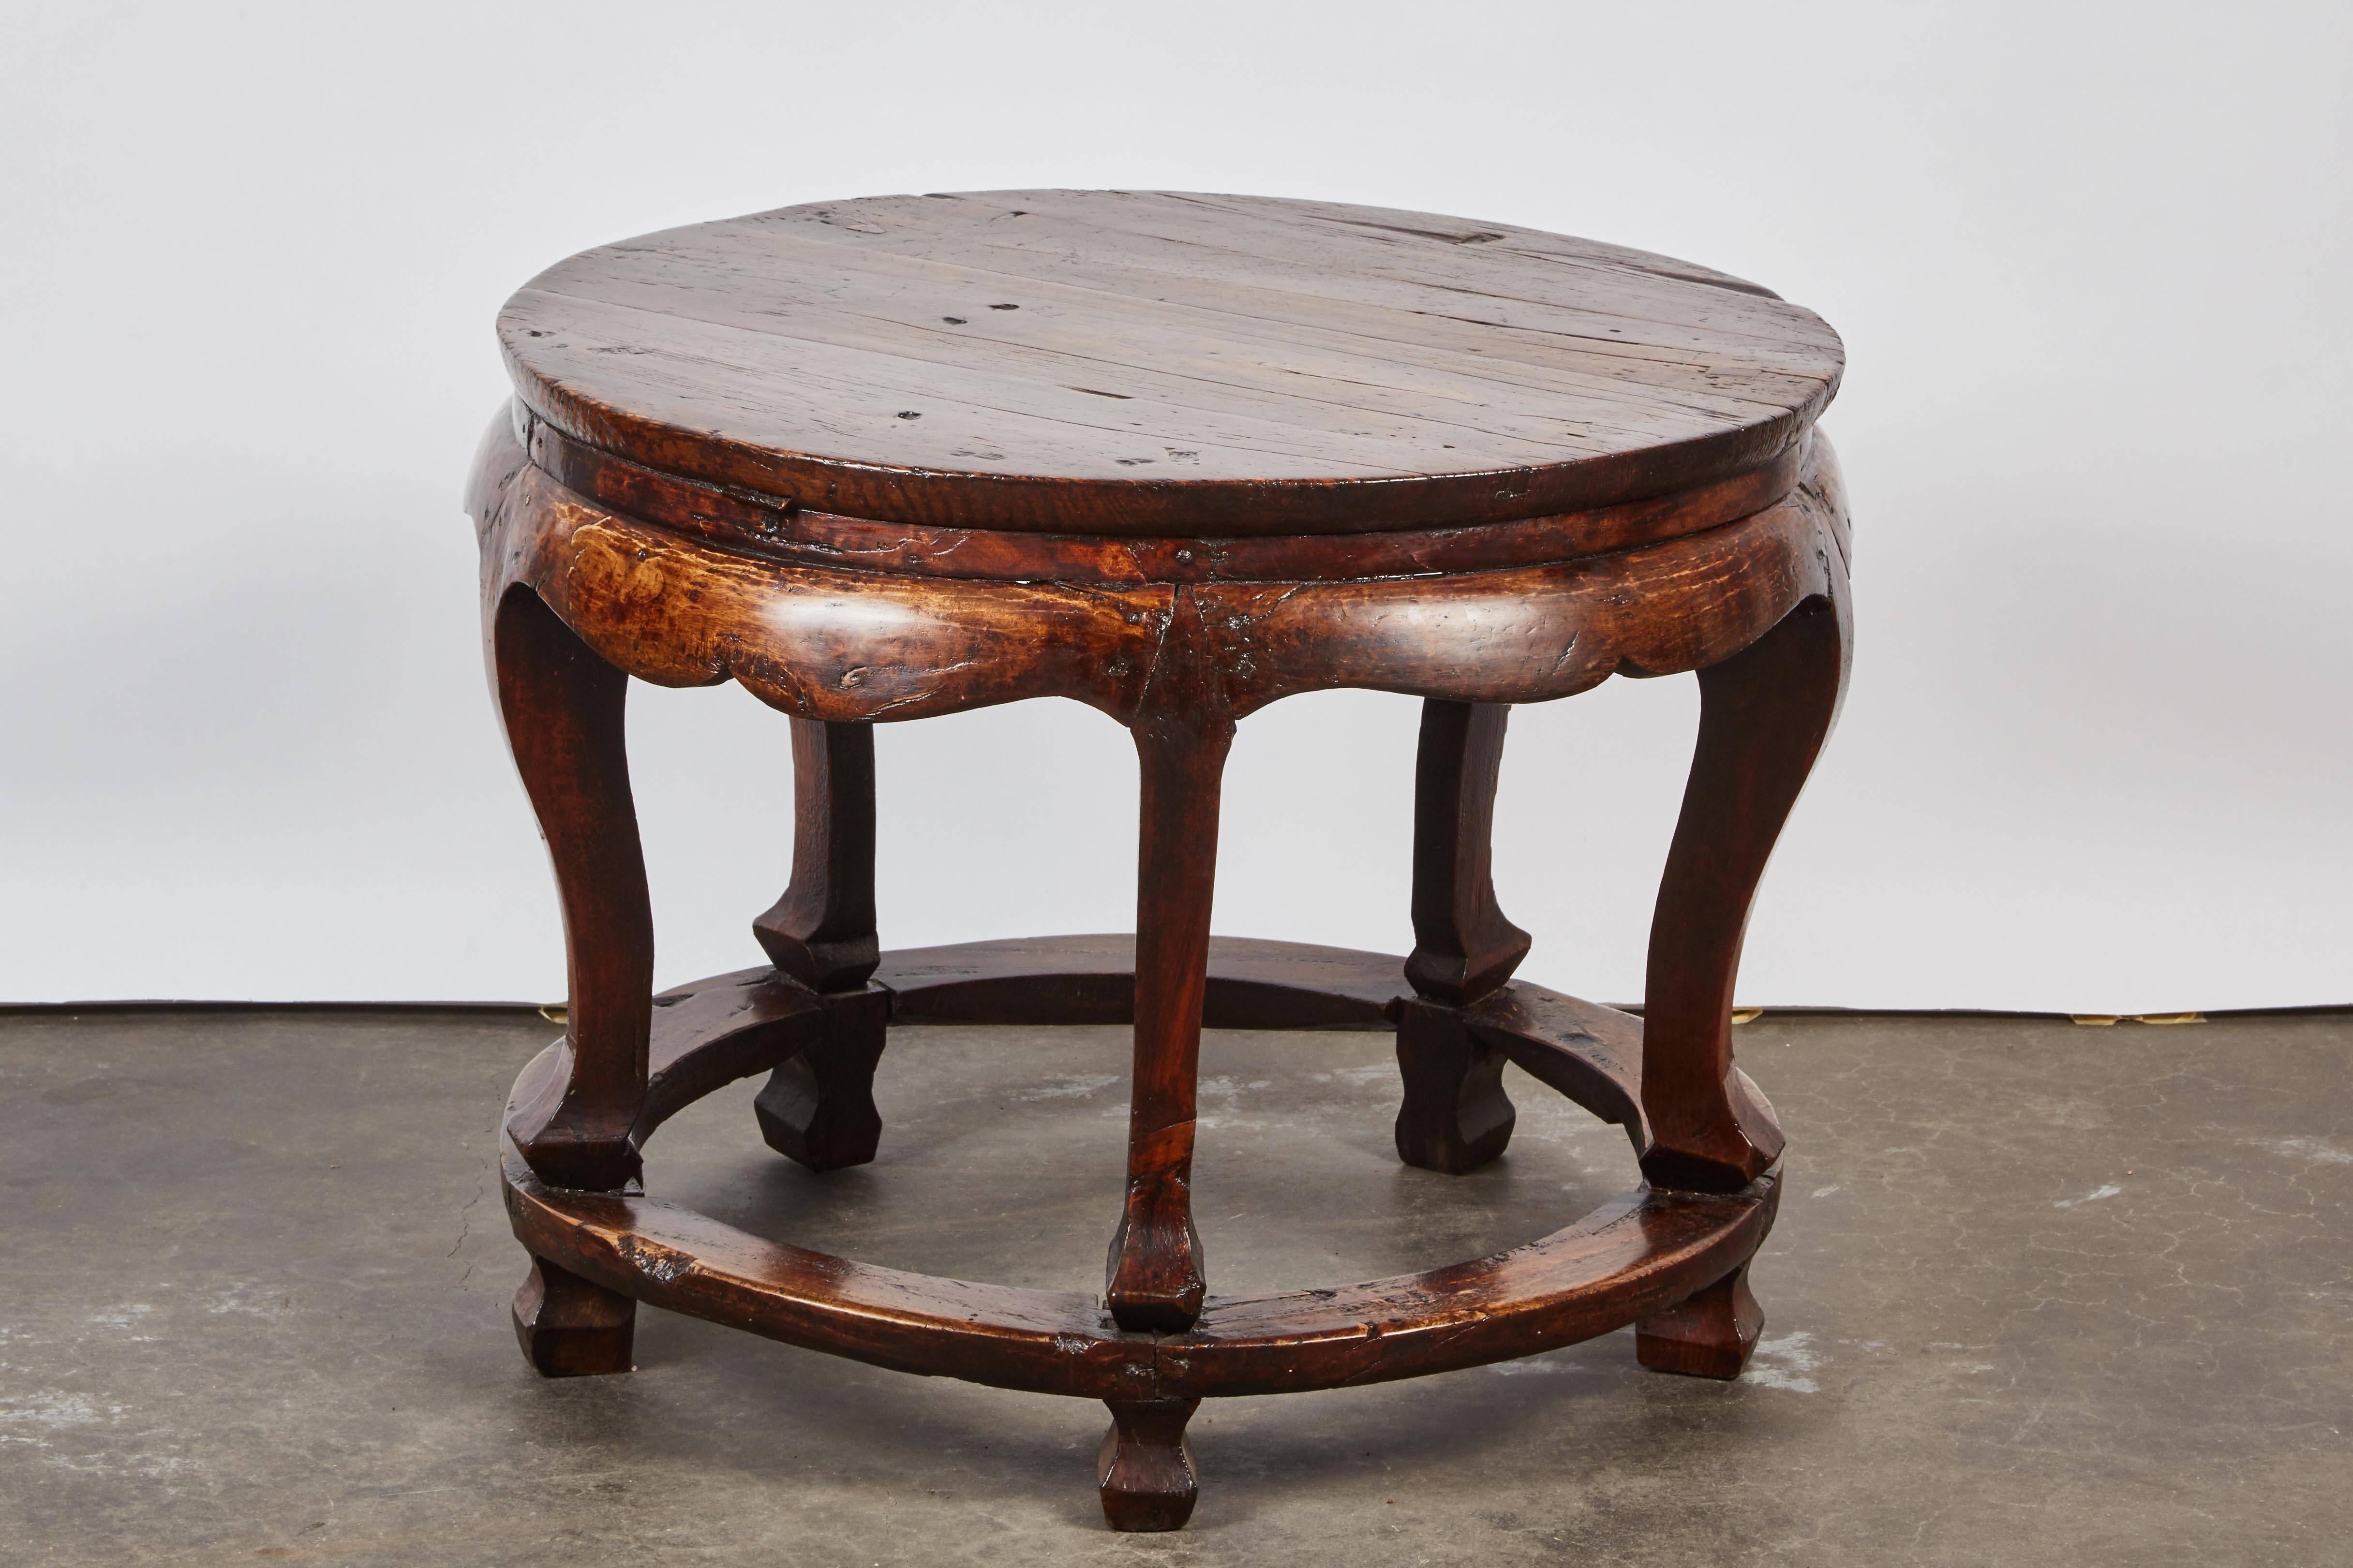 An extremely rare low round table from the Qing dynasty with original finish and is originally from Shanxi, China.